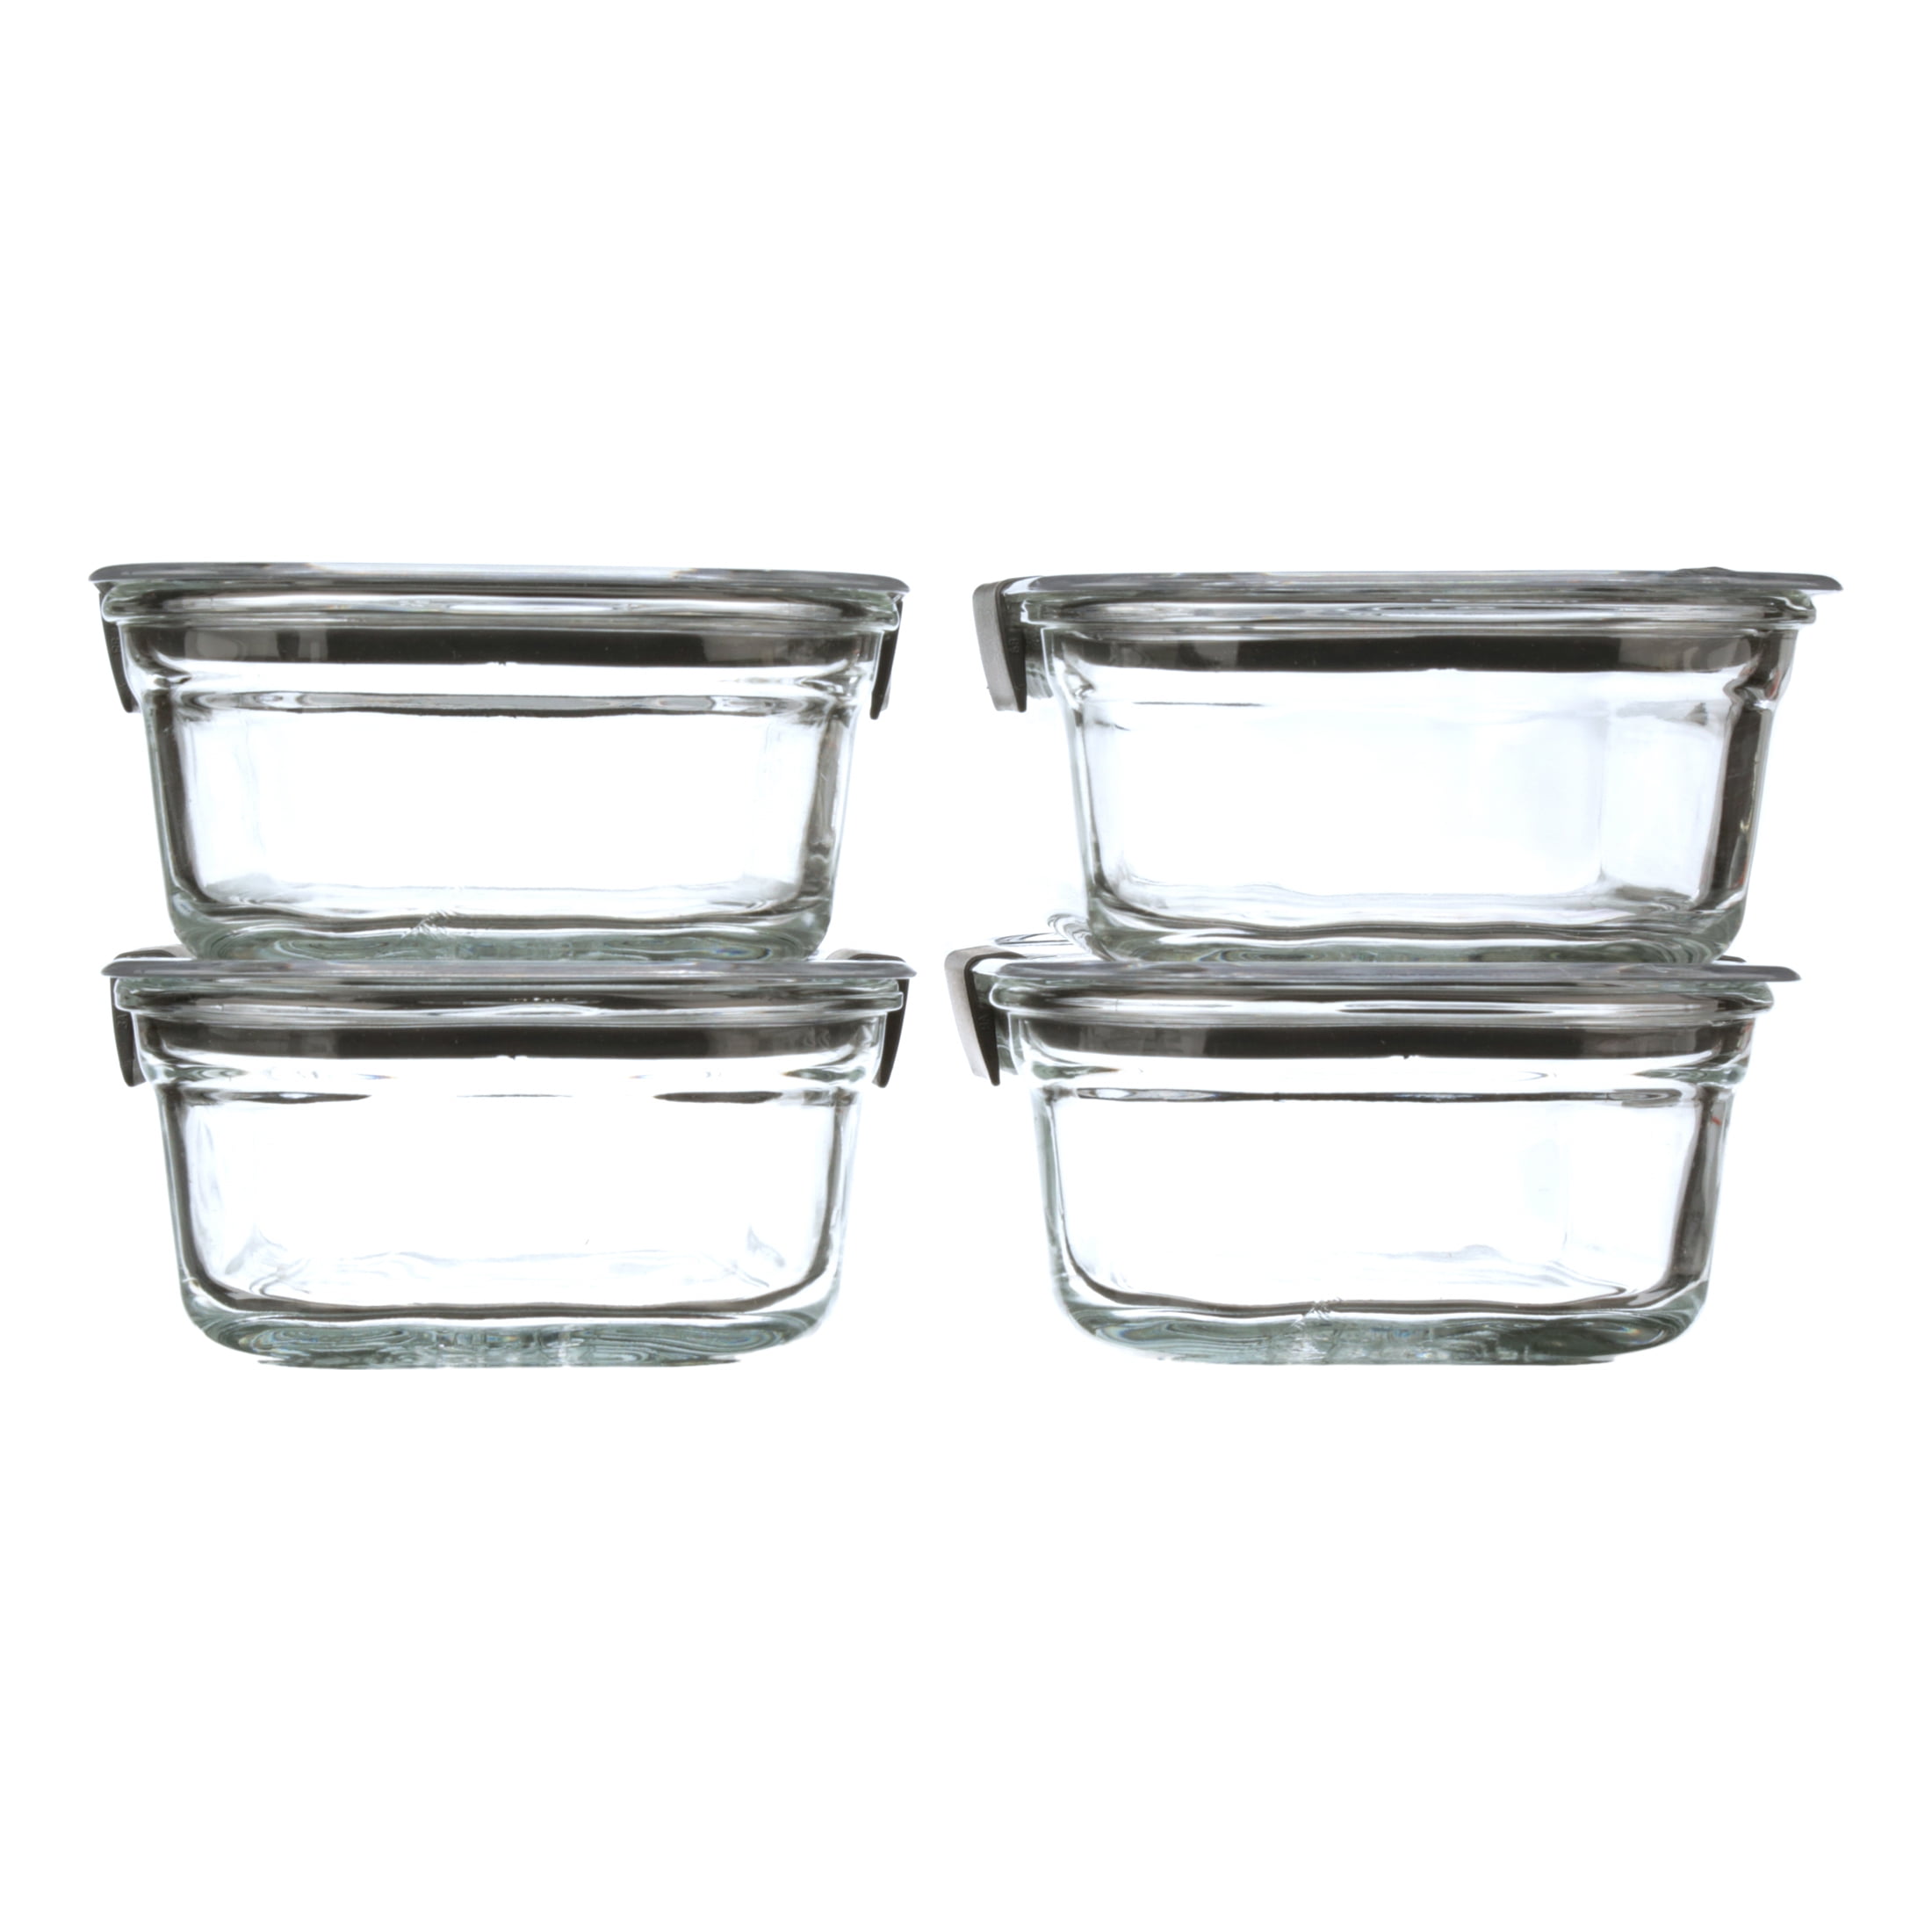 Rubbermaid 2-Pack 3.2 Cup Brilliance Glass Food Storage - 2183406